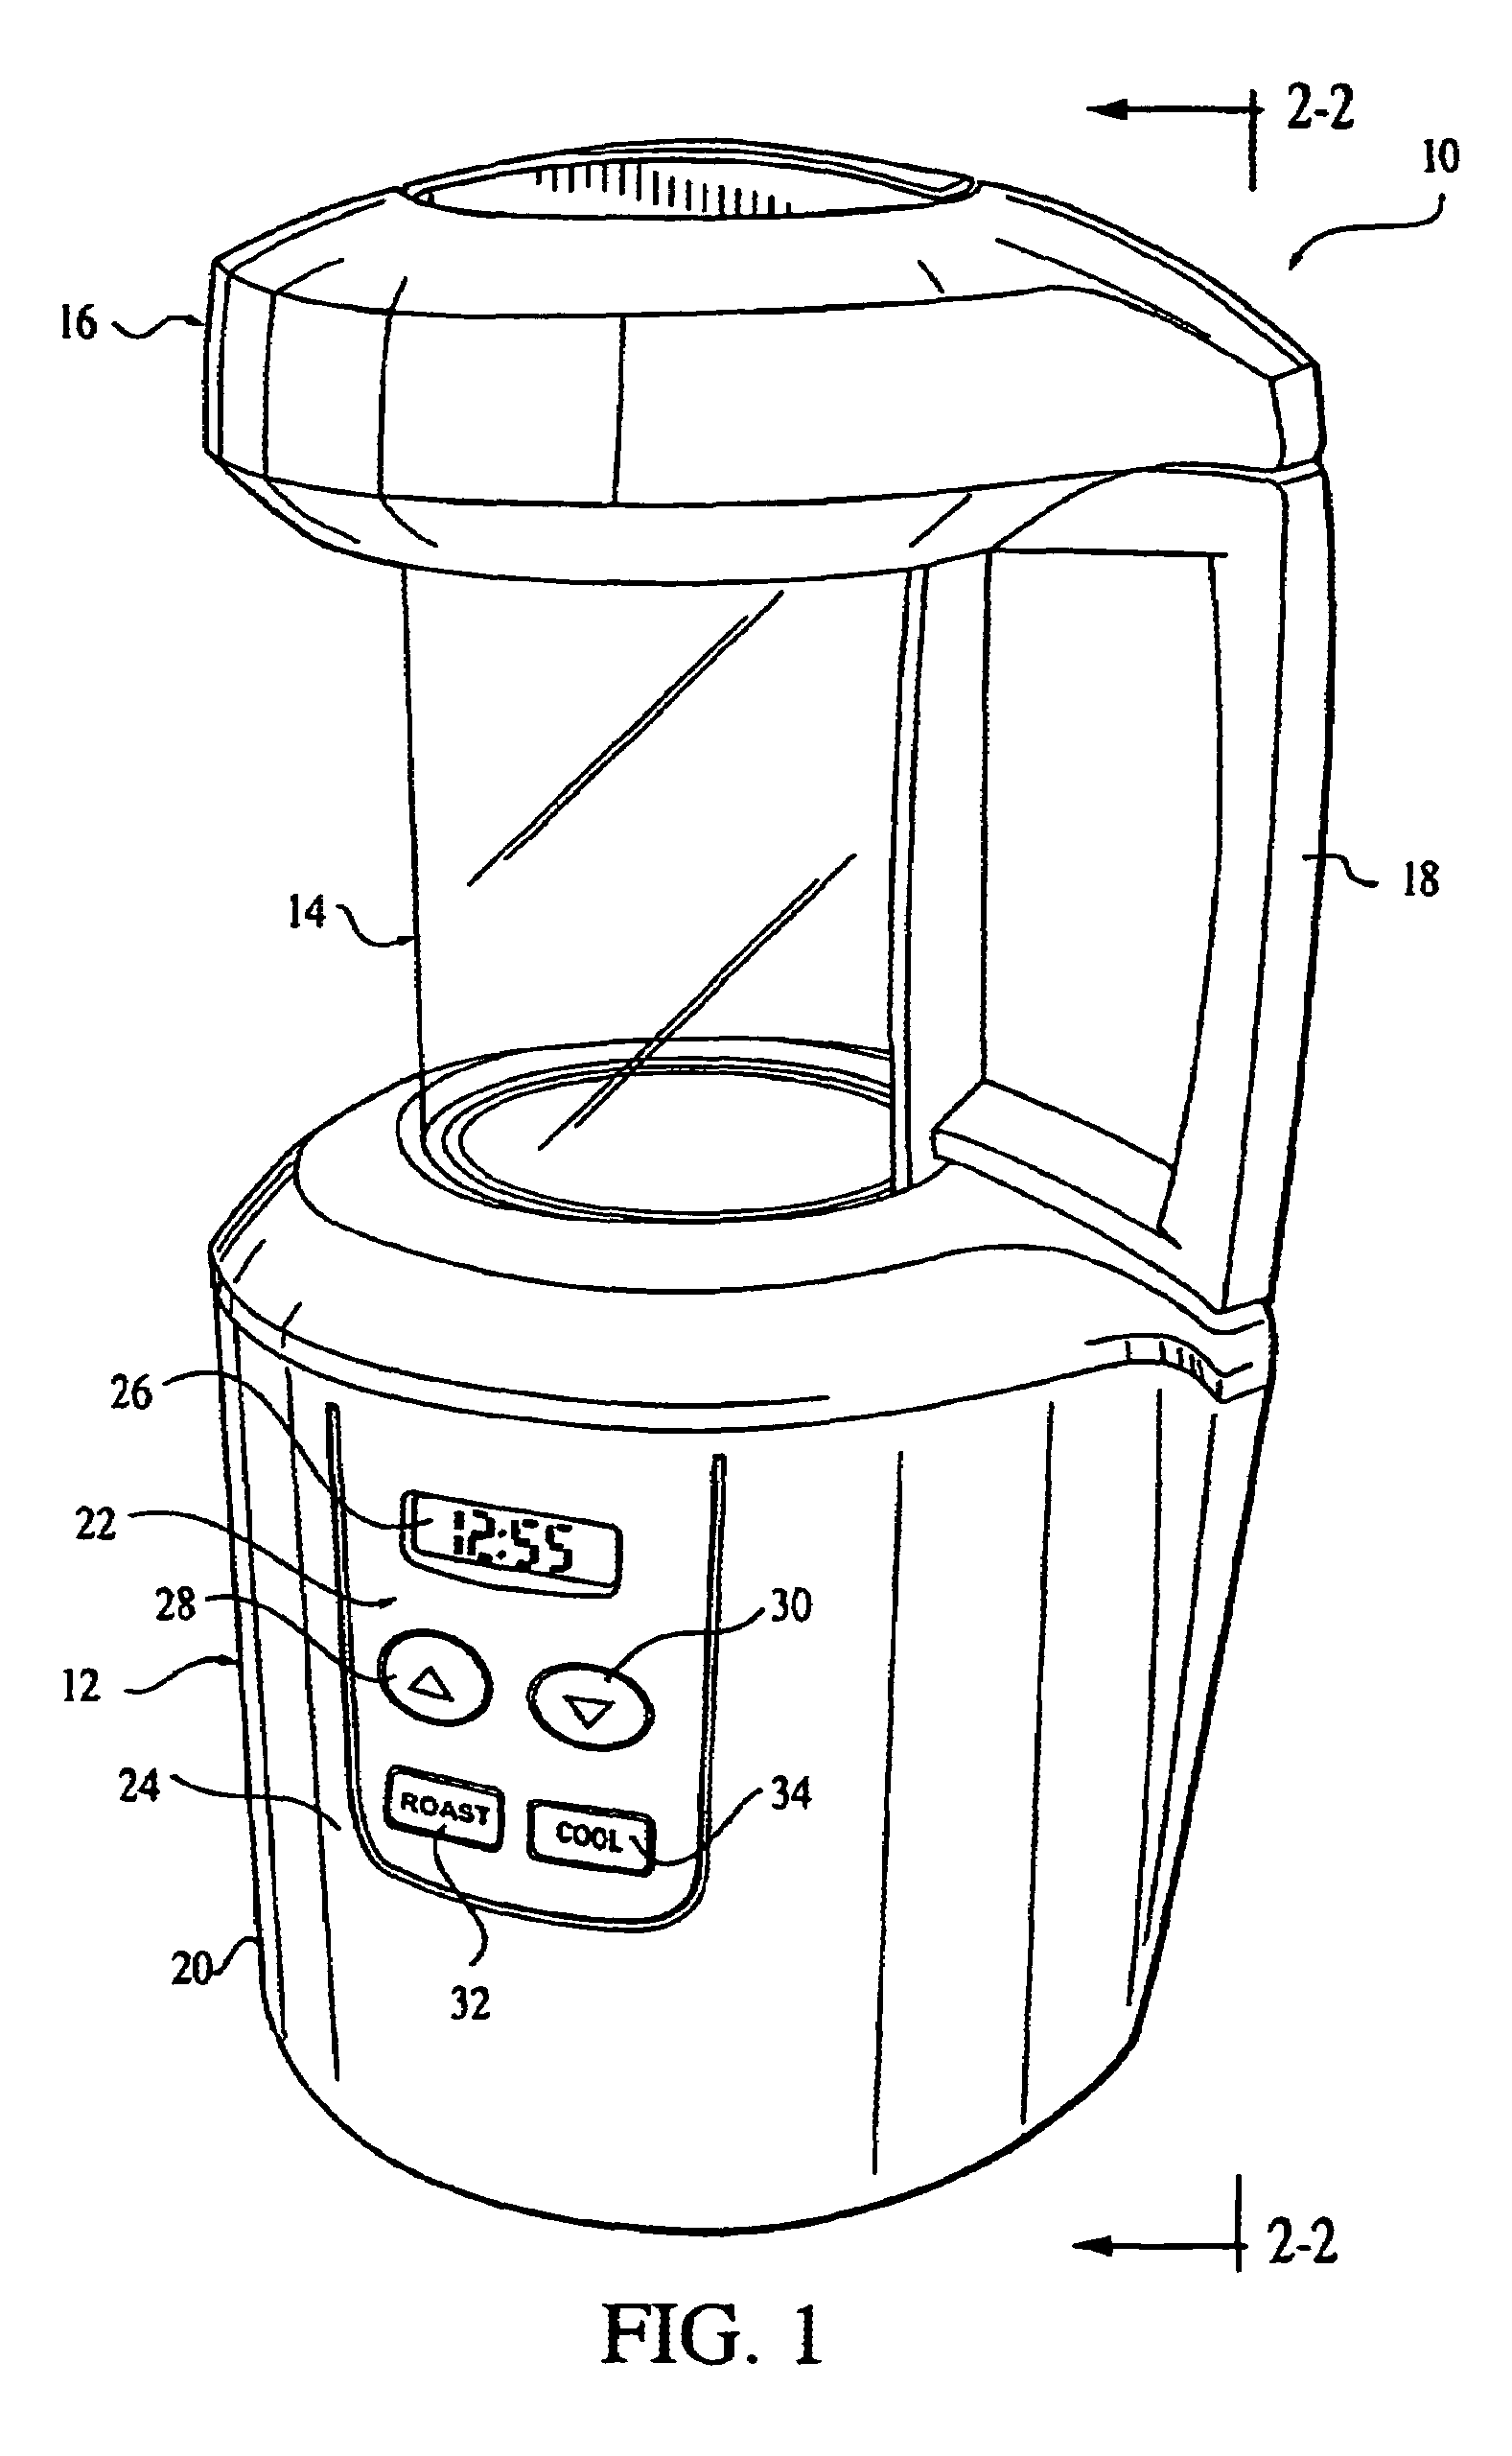 Coffee roaster having an apparatus for increasing airflow in a roasting chamber